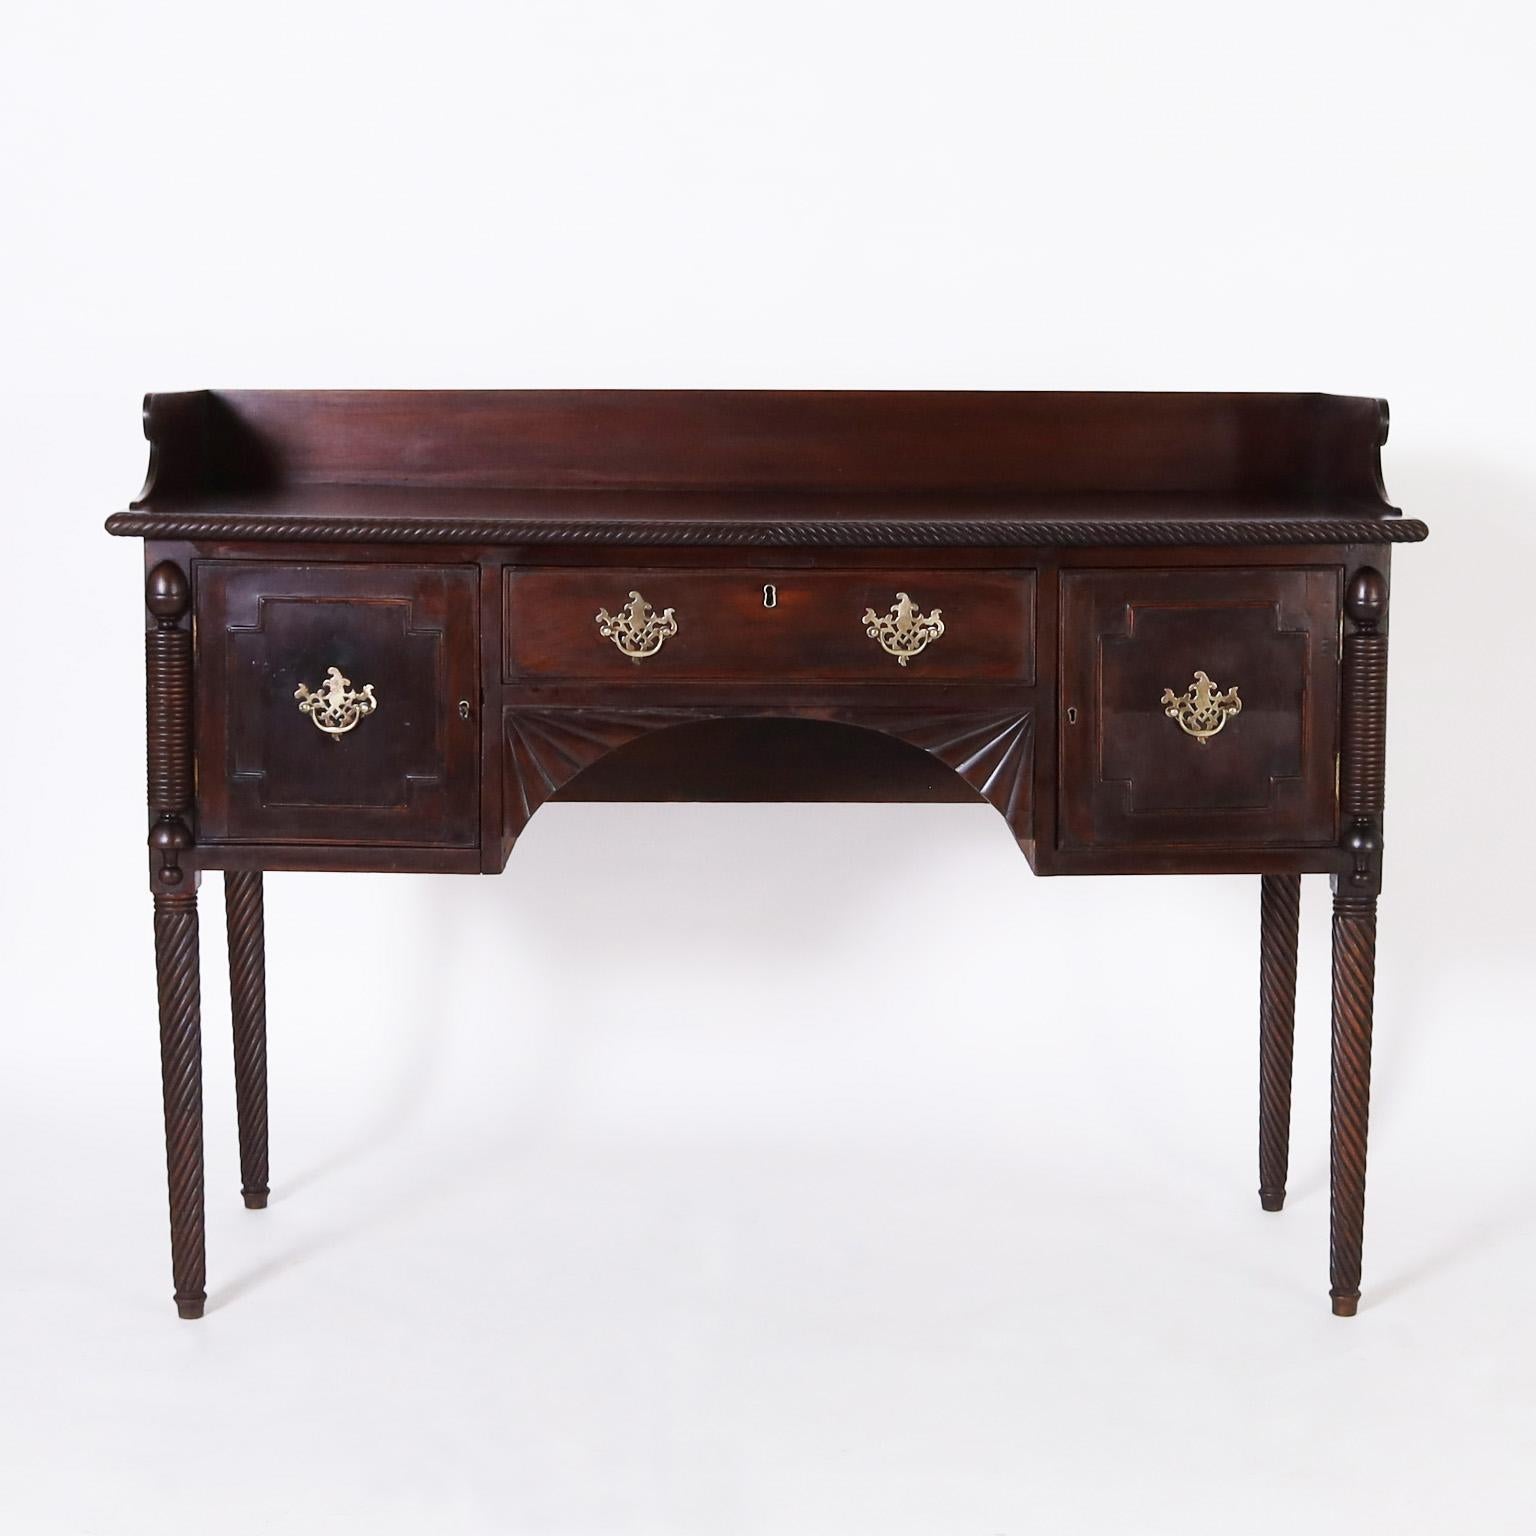 Rare and Remarkable 19th century British colonial server handcrafted in mahogany with a dark lush finish featuring a classic gallery on the top, two doors and a drawer, brass hardware, fan brackets and elegant turned and twisted legs.